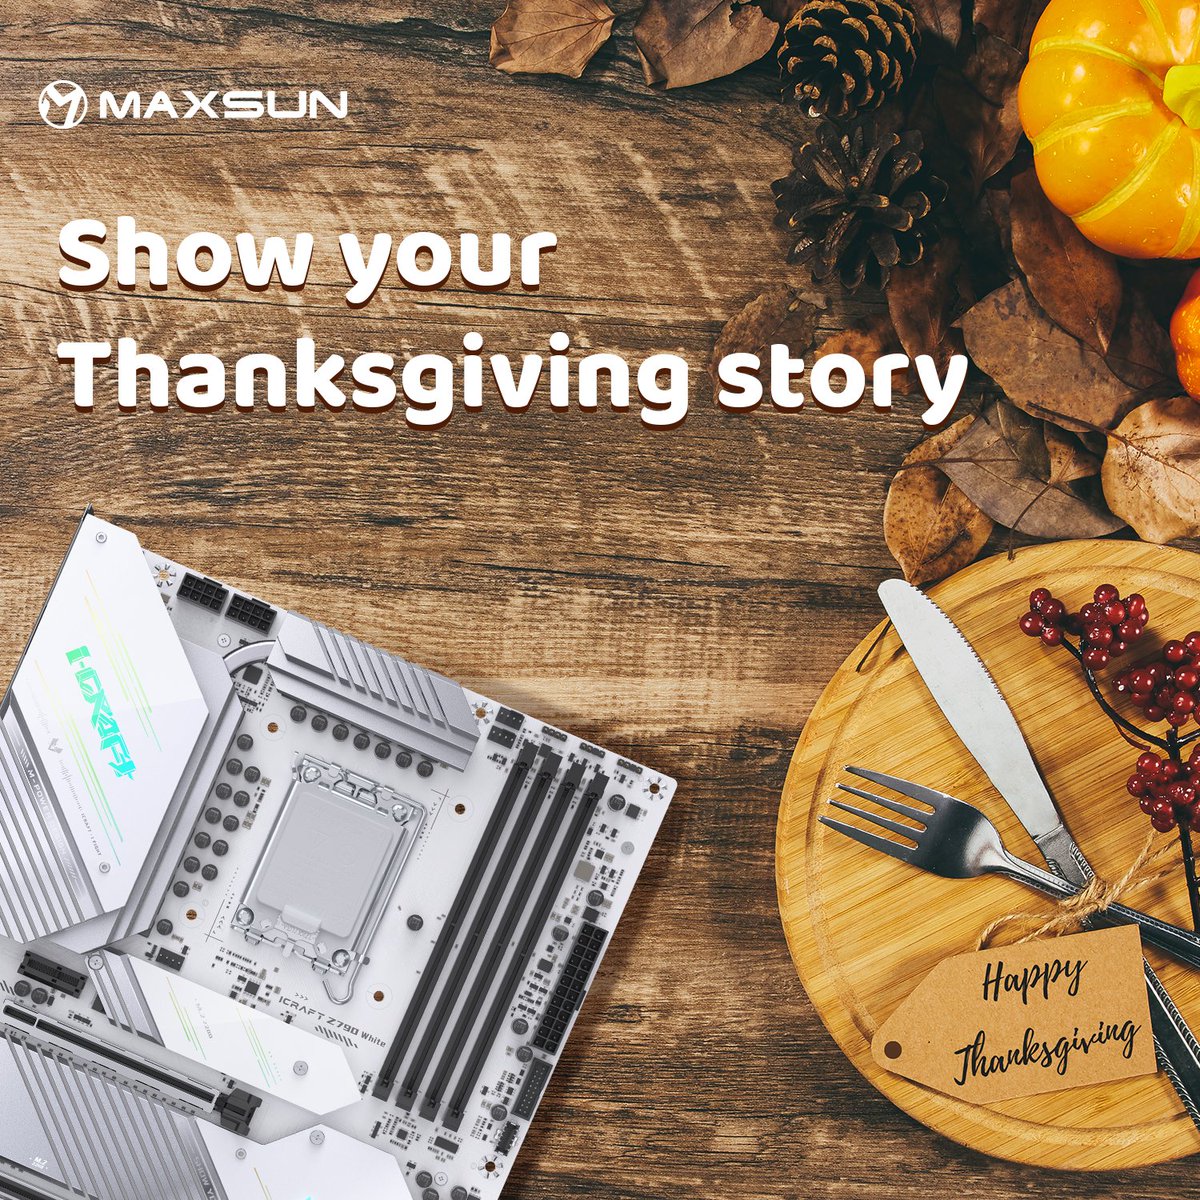 🚀 Launching into a season of gratitude with MAXSUN. Our latest creation brings power, style, and a dash of thankfulness to your everyday life. 

#PowerfulThanks #StyleRevolution